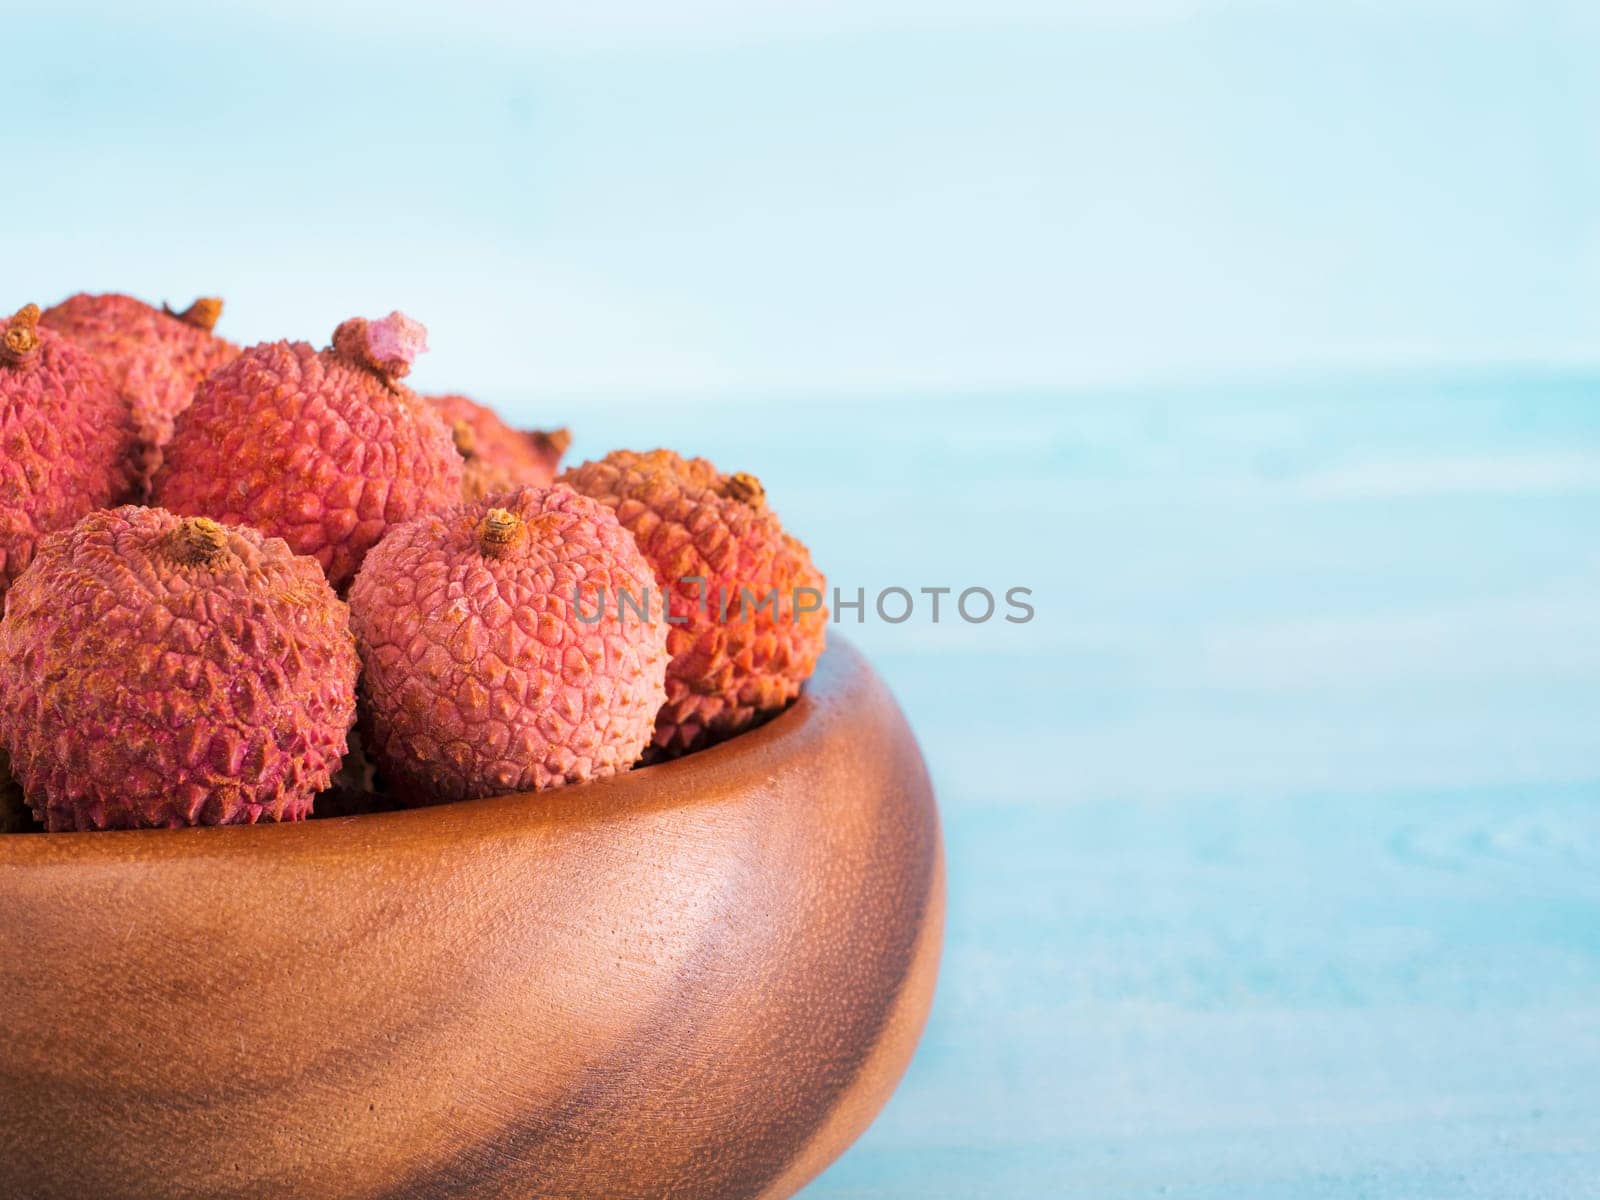 lychee fruit in clay plate on blue wooden background close up